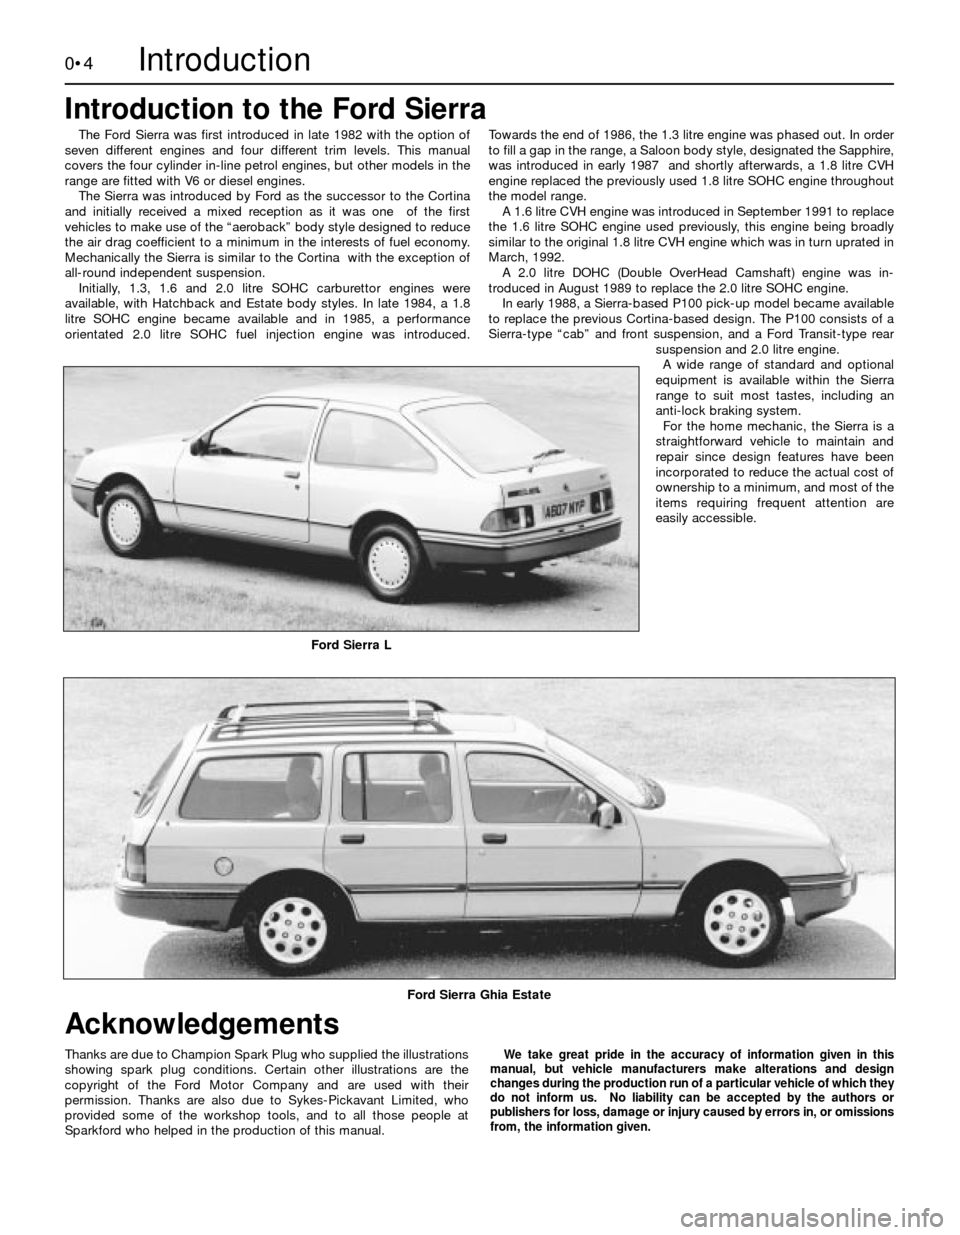 FORD SIERRA 1986 1.G Introduction Workshop Manual 0•4
The Ford Sierra was first introduced in late 1982 with the option of
seven different engines and four different trim levels. This manual
covers the four cylinder in-line petrol engines, but othe